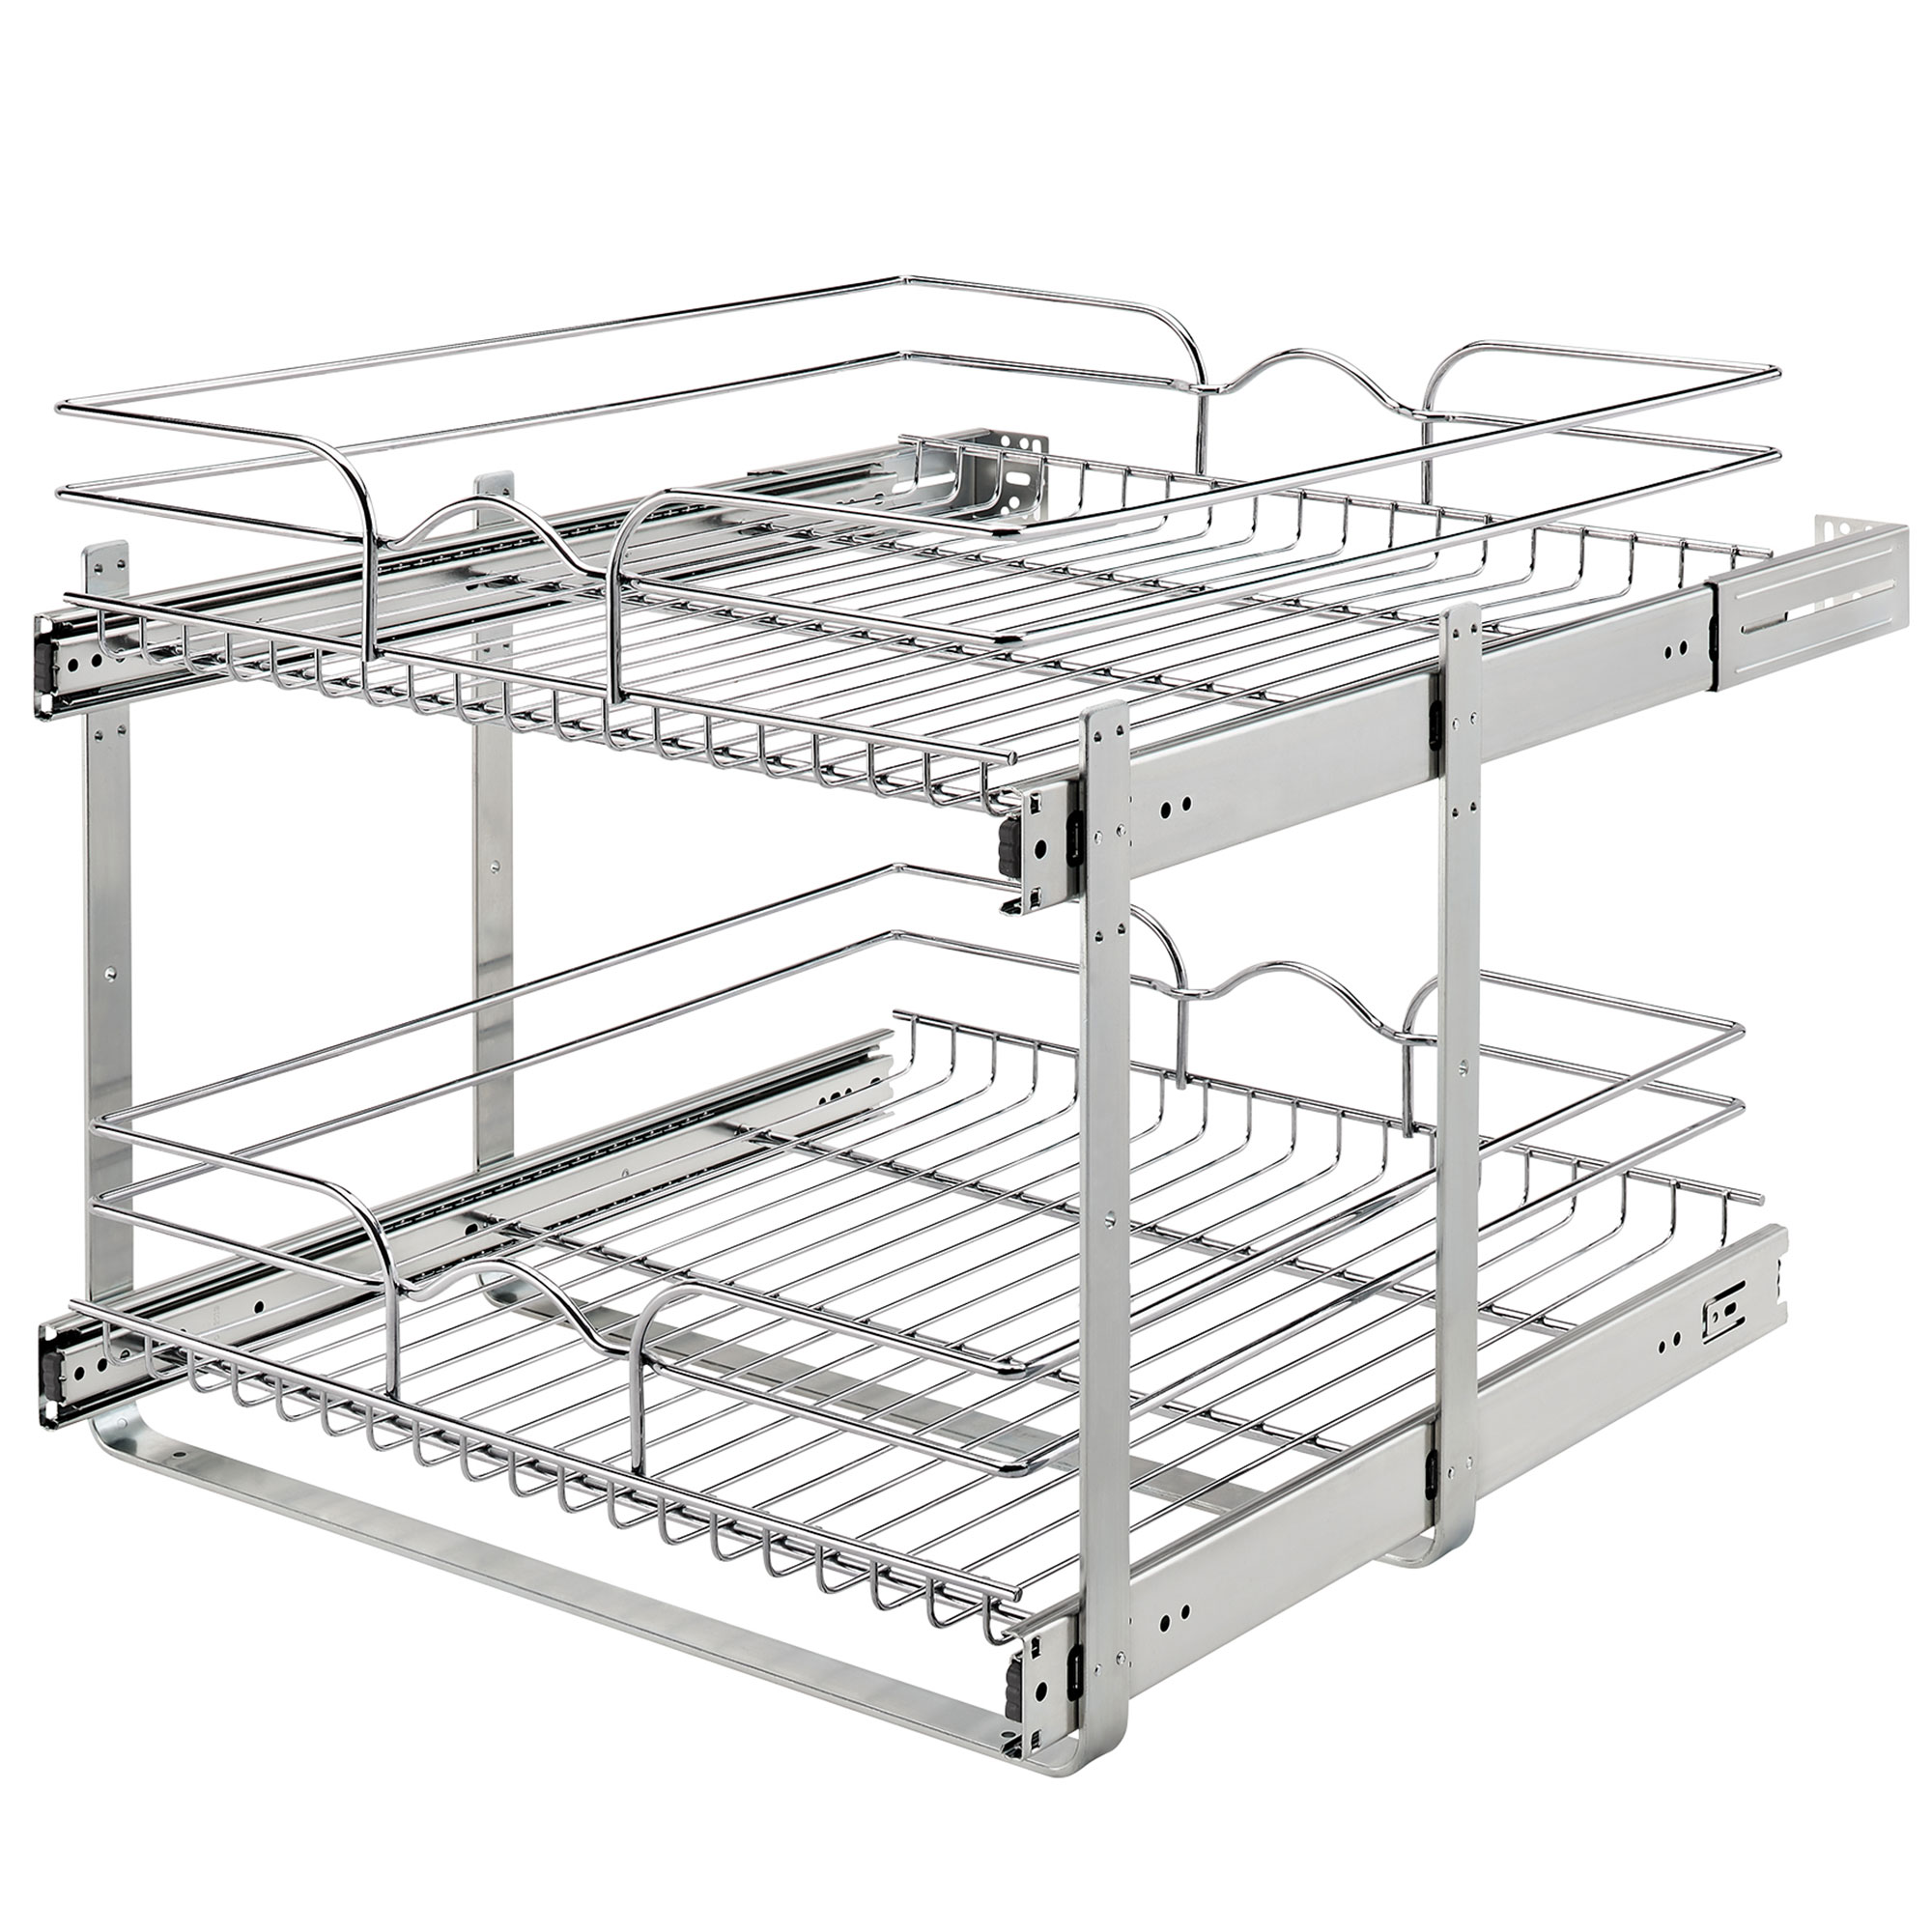 Rev-A-Shelf 21"x22" 2-Tier Wire Pull Out Cabinet Drawer Basket $104.03 + Free Shipping